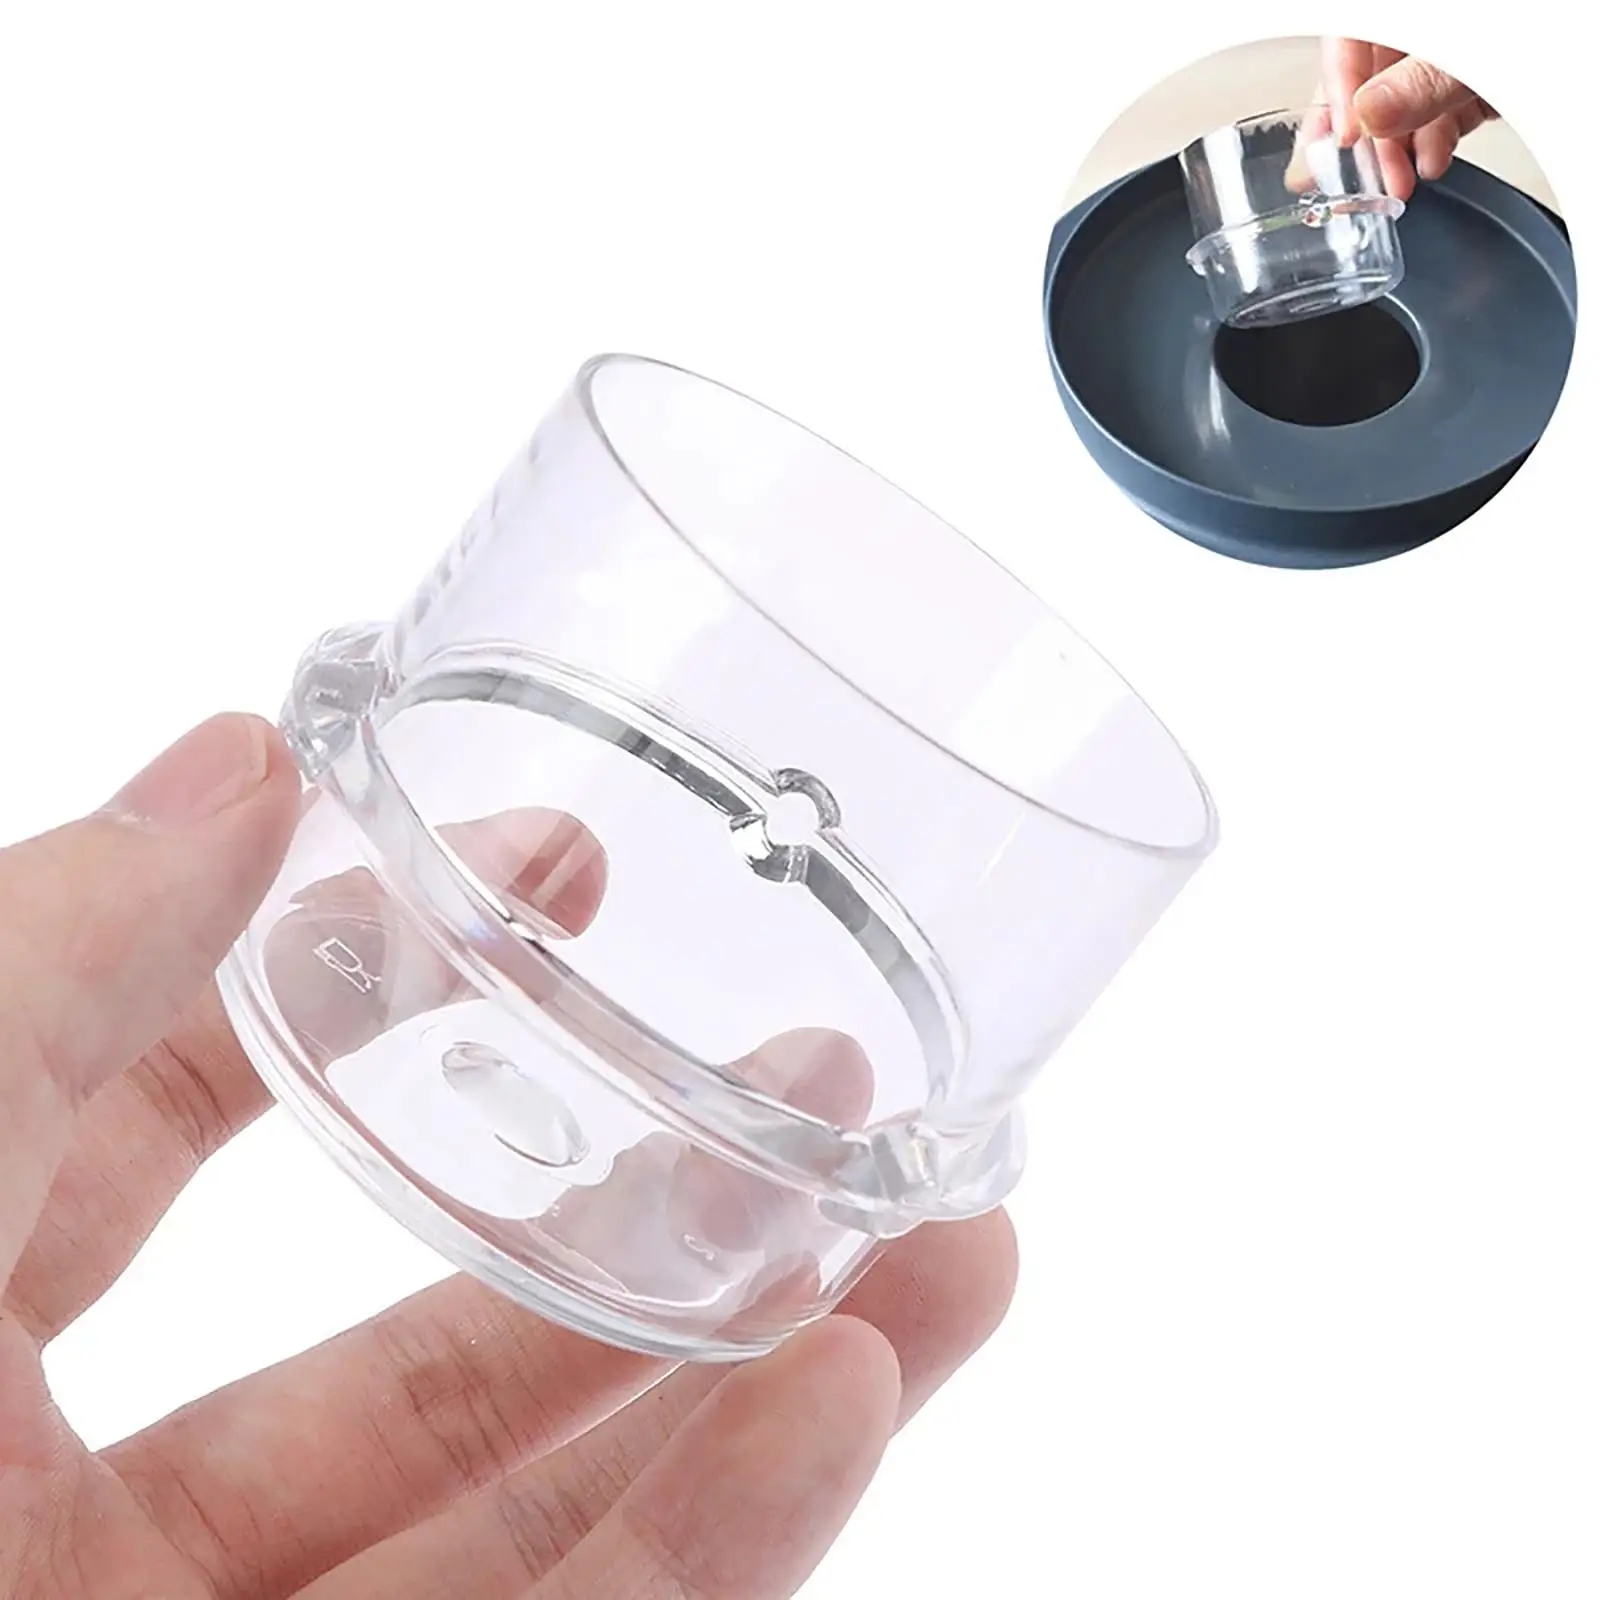 Measuring Cup 100ml for Thermomix TM6 TM5 Detachable Filling Port Cover Simple to Install